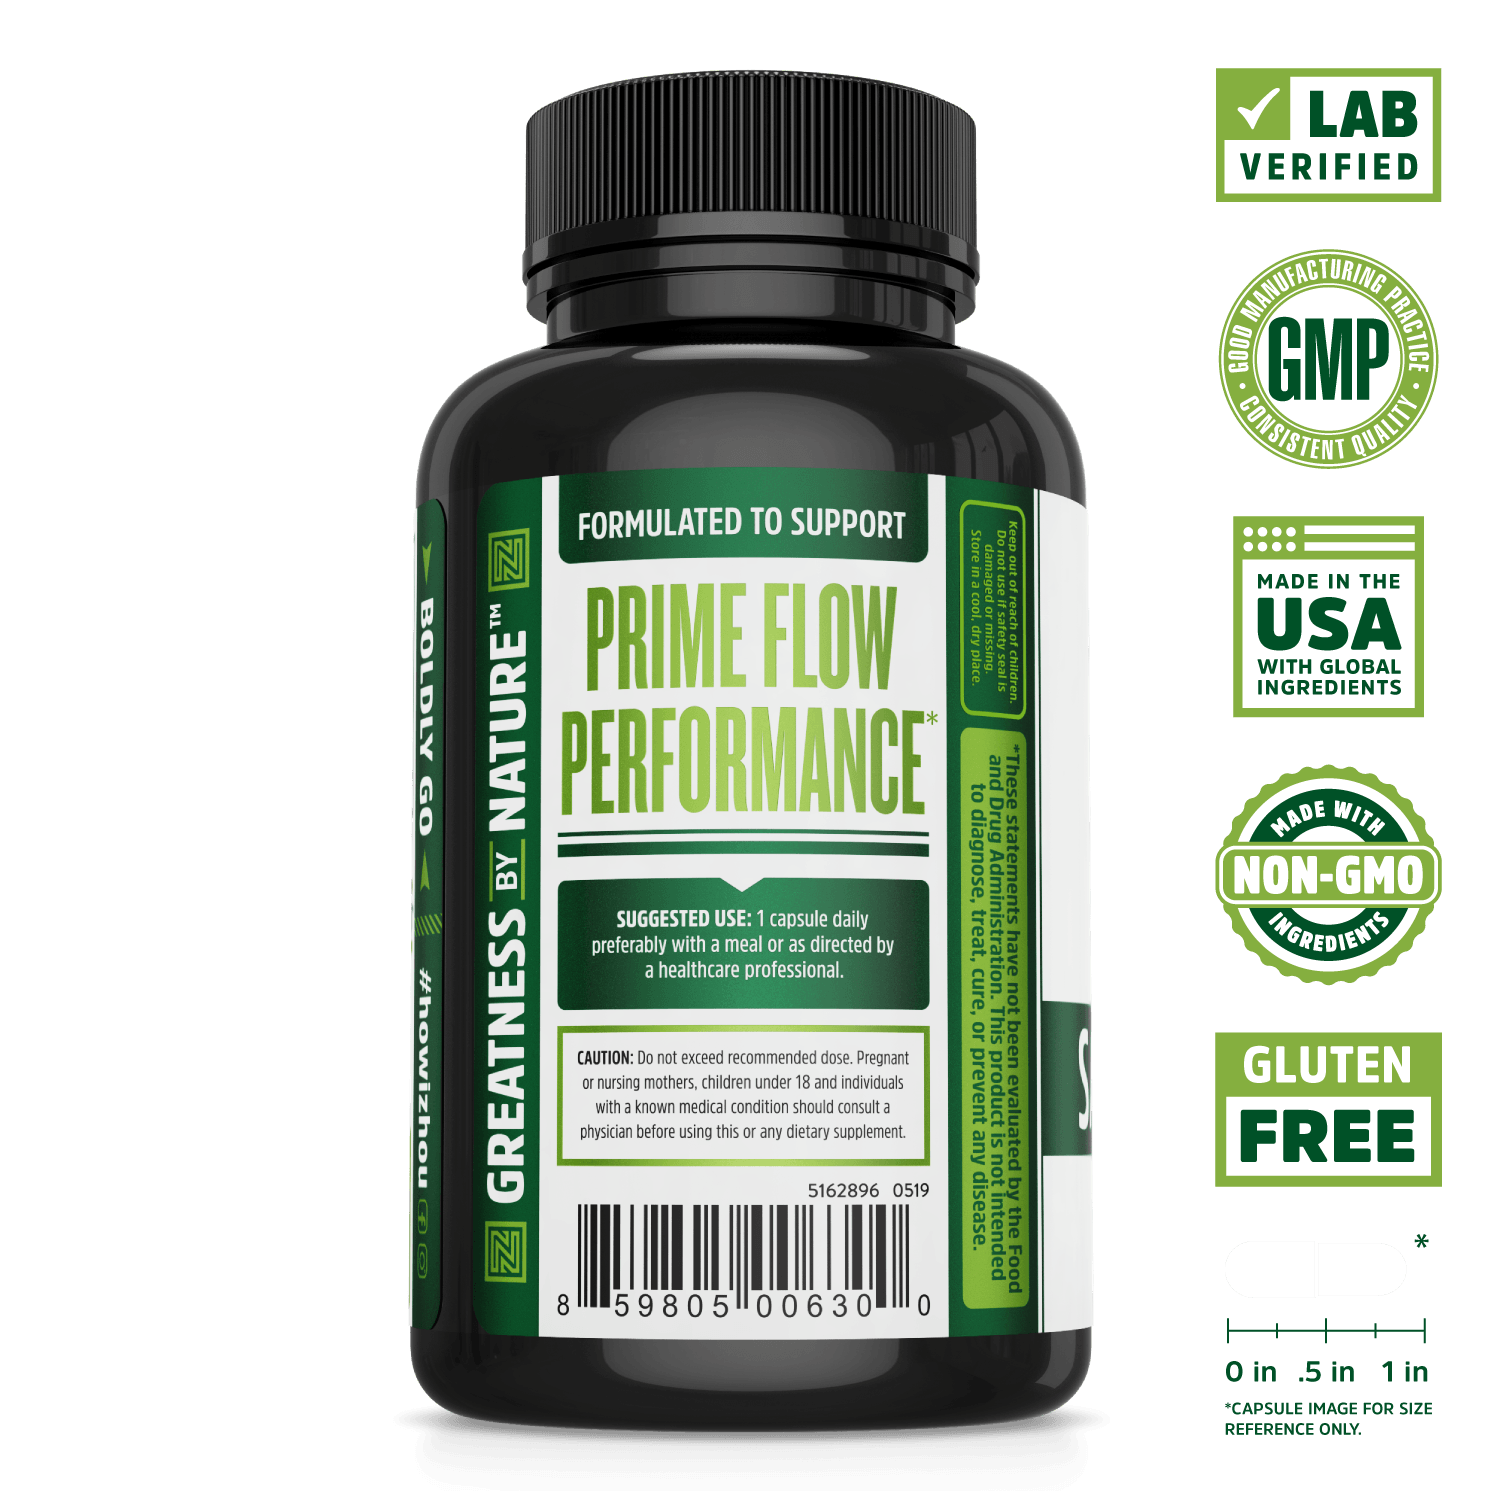 Saw Palmetto Supplement Support for Healthy Urination.  Lab verified, good manufacturing practices, made in the USA with global ingredients, made with non-GMO ingredients, gluten free.